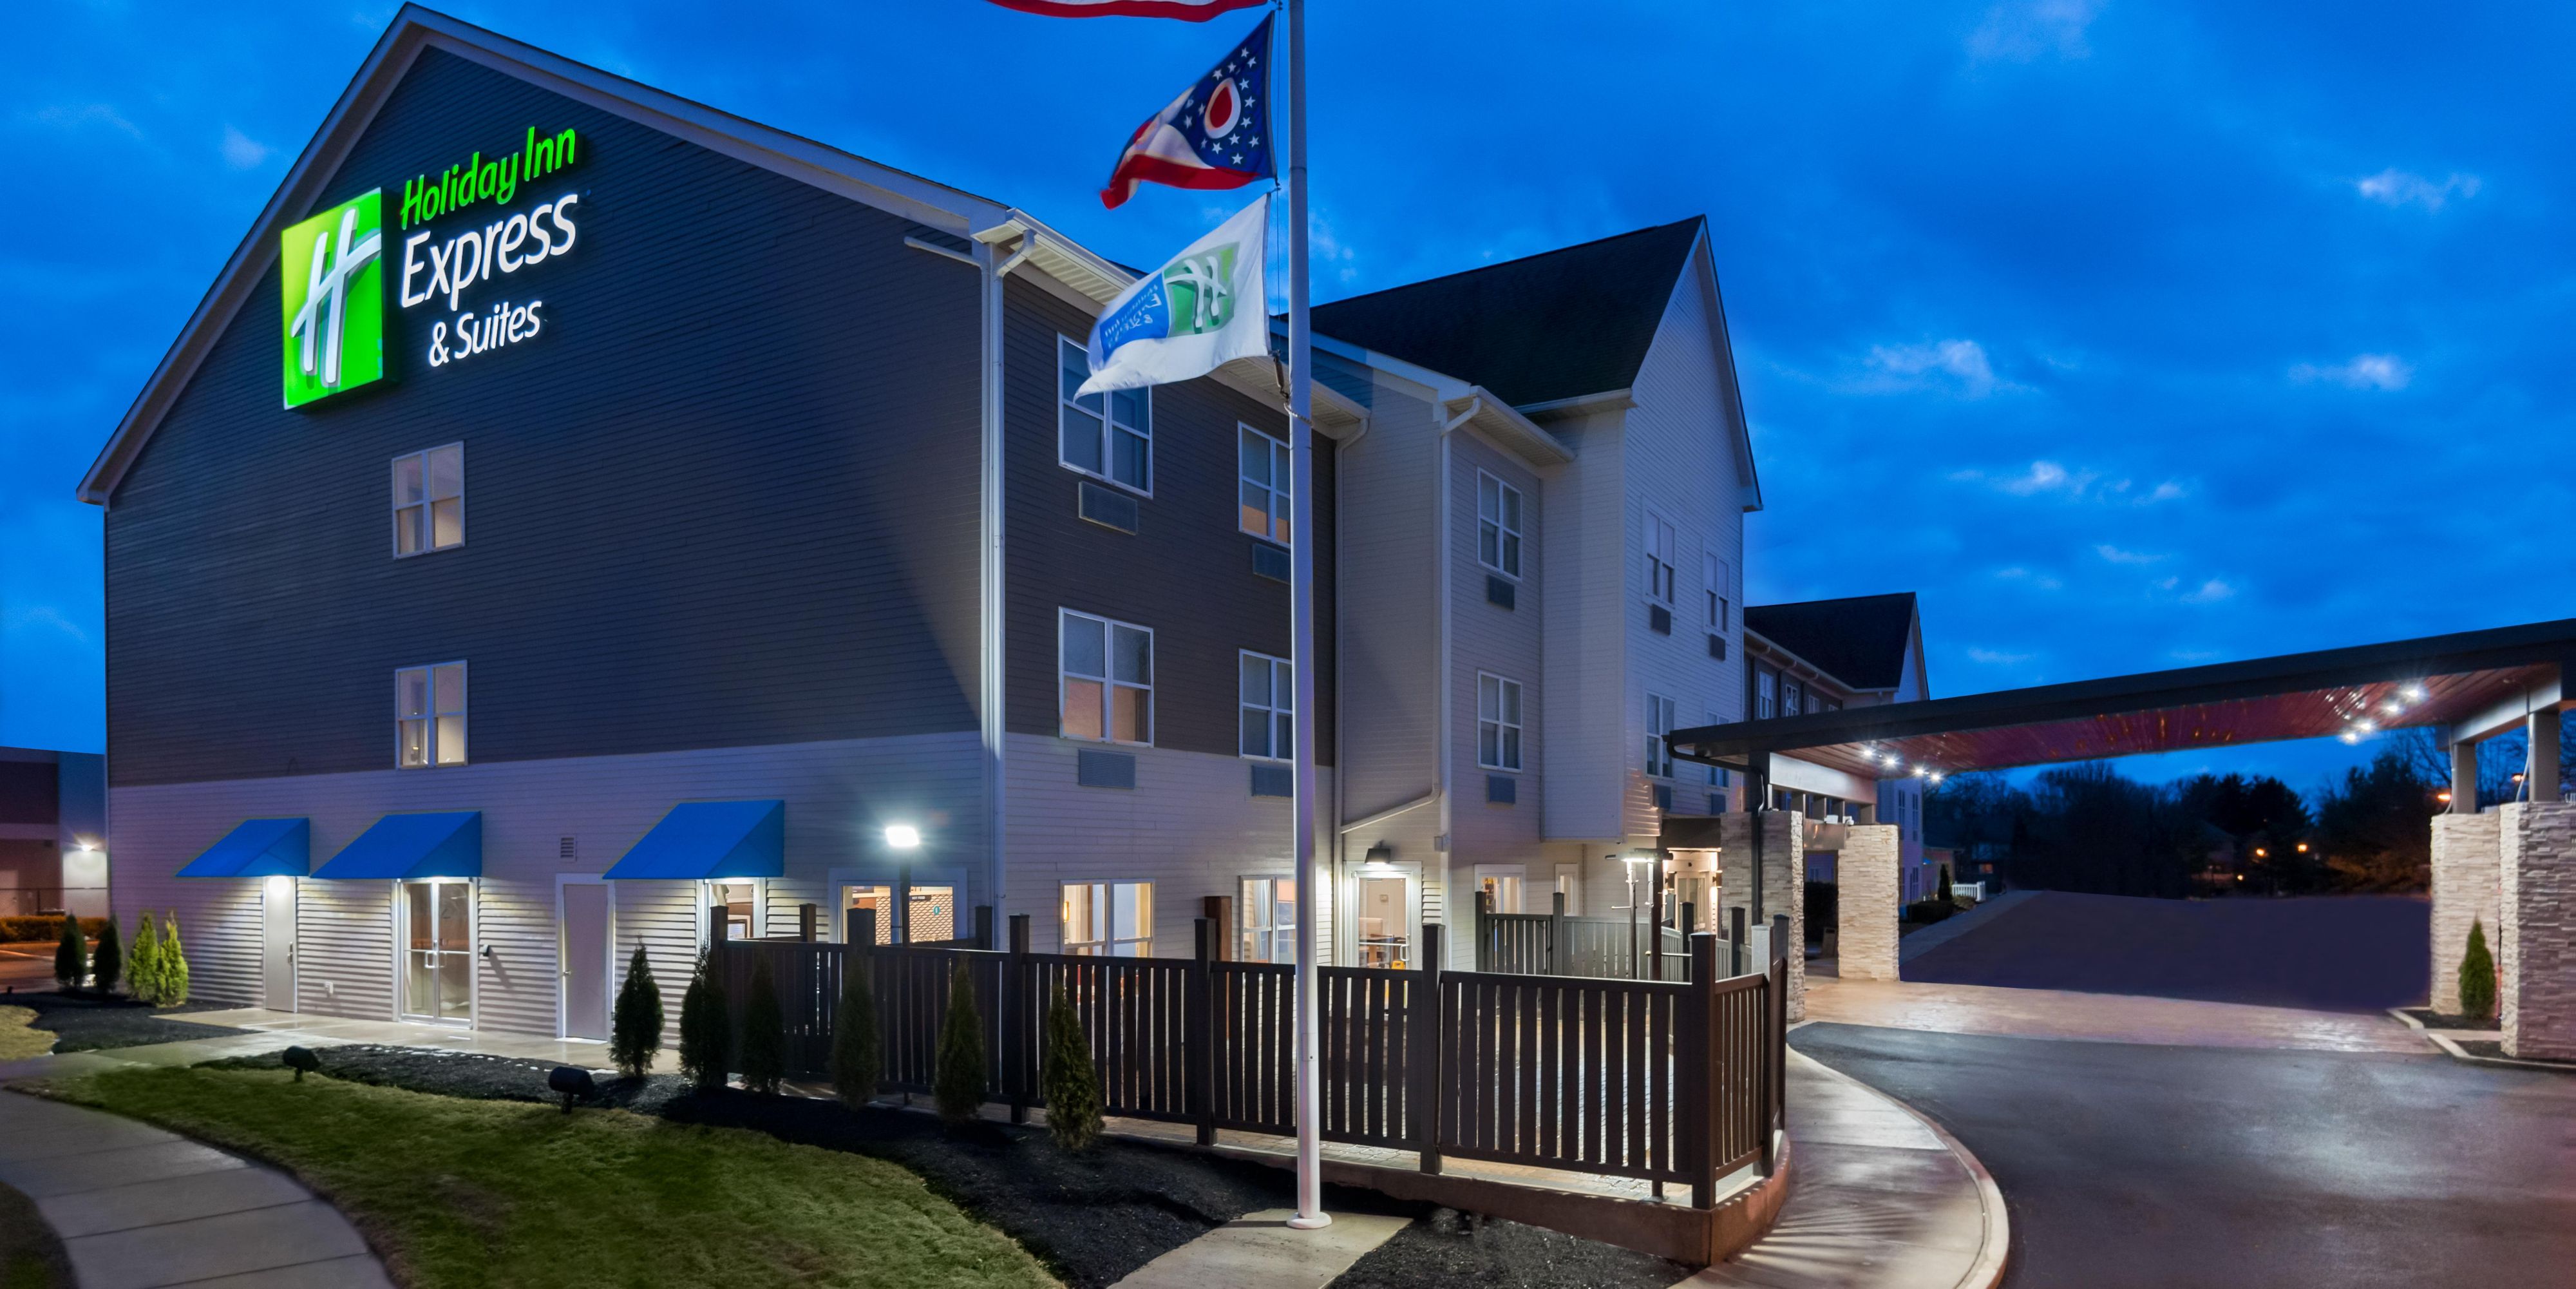 On the road? Take a break and get a good night’s sleep with comfortable accommodations in Columbus, Ohio. We offer free truck parking, guest rooms & suites with modern amenities, well-lit bathrooms with walk-in showers, and free daily breakfast.